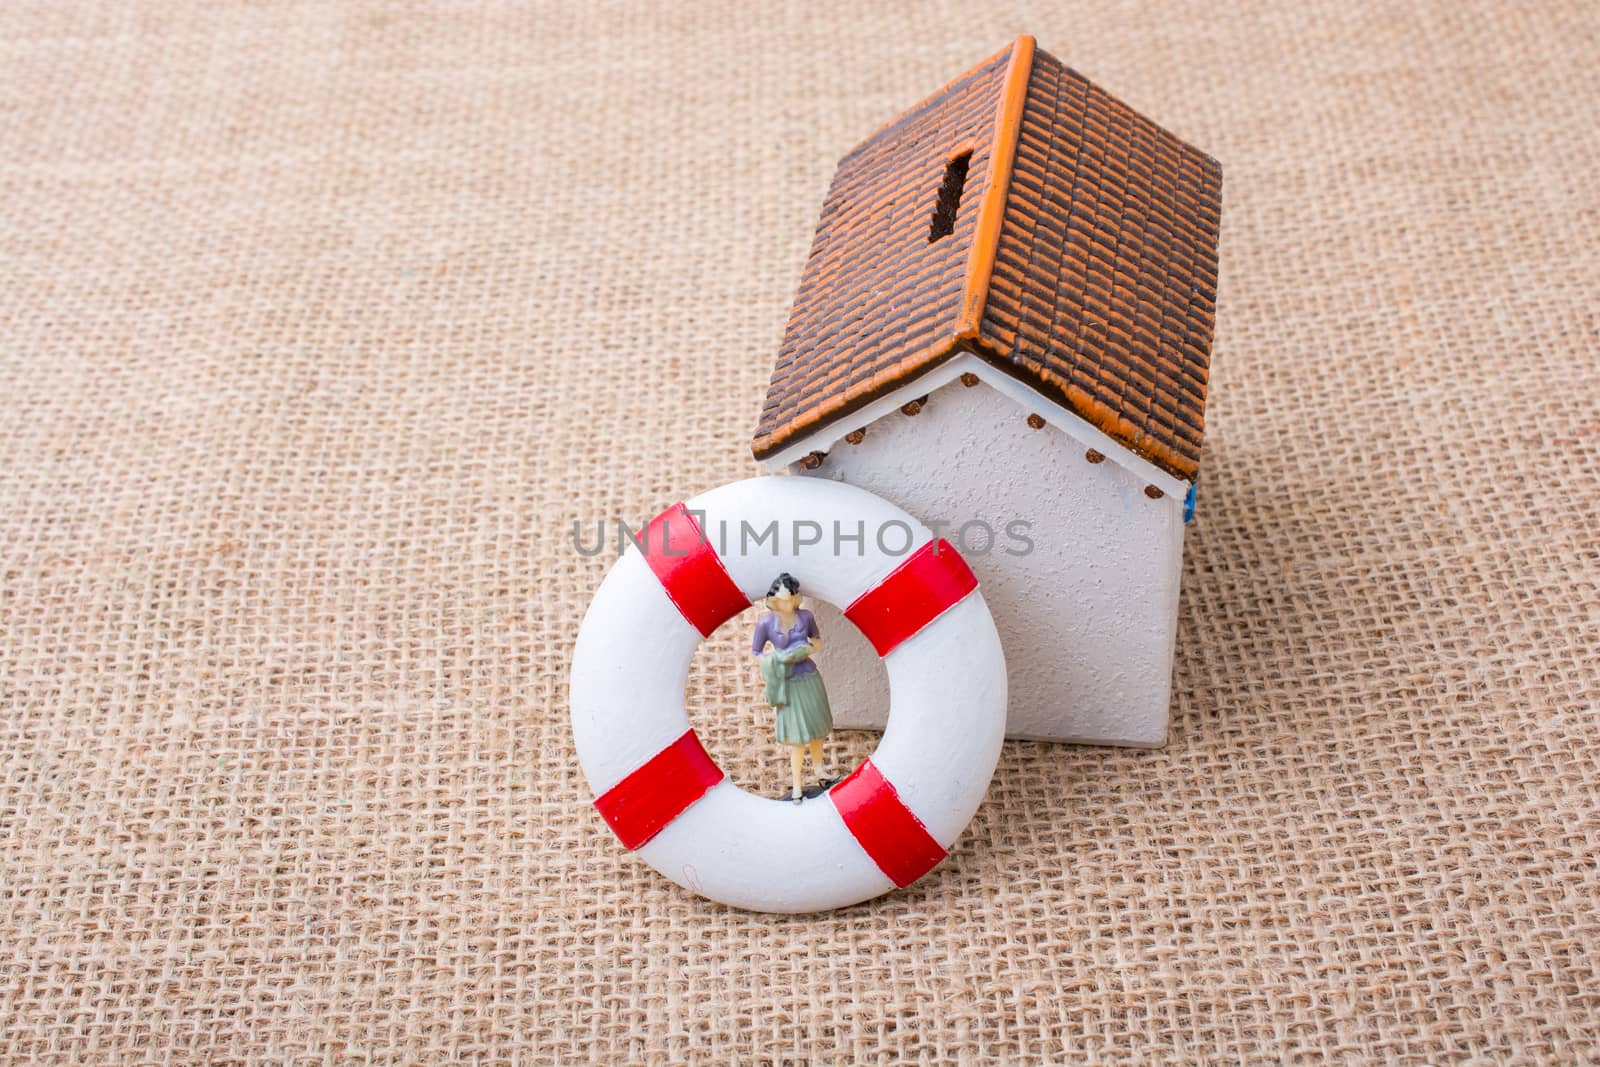 Model house and a life preserver with a woman figure on it